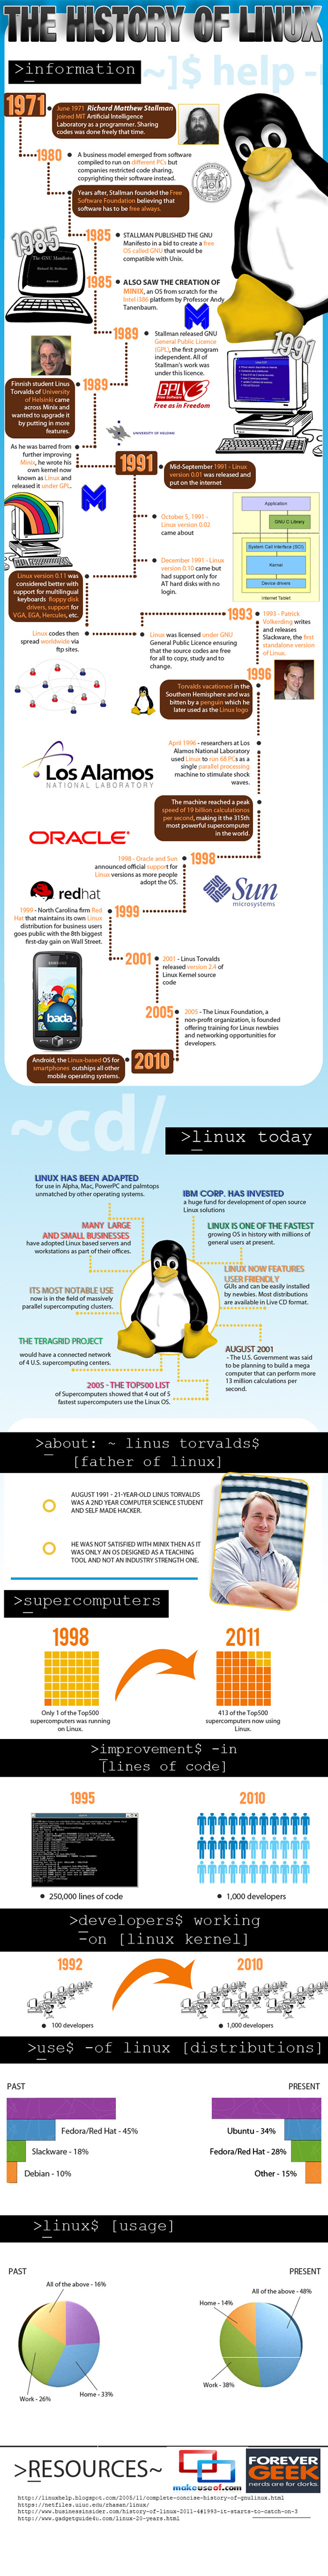 the_history_of_linuthe_history_of_linux_MakeUseOf.jpg